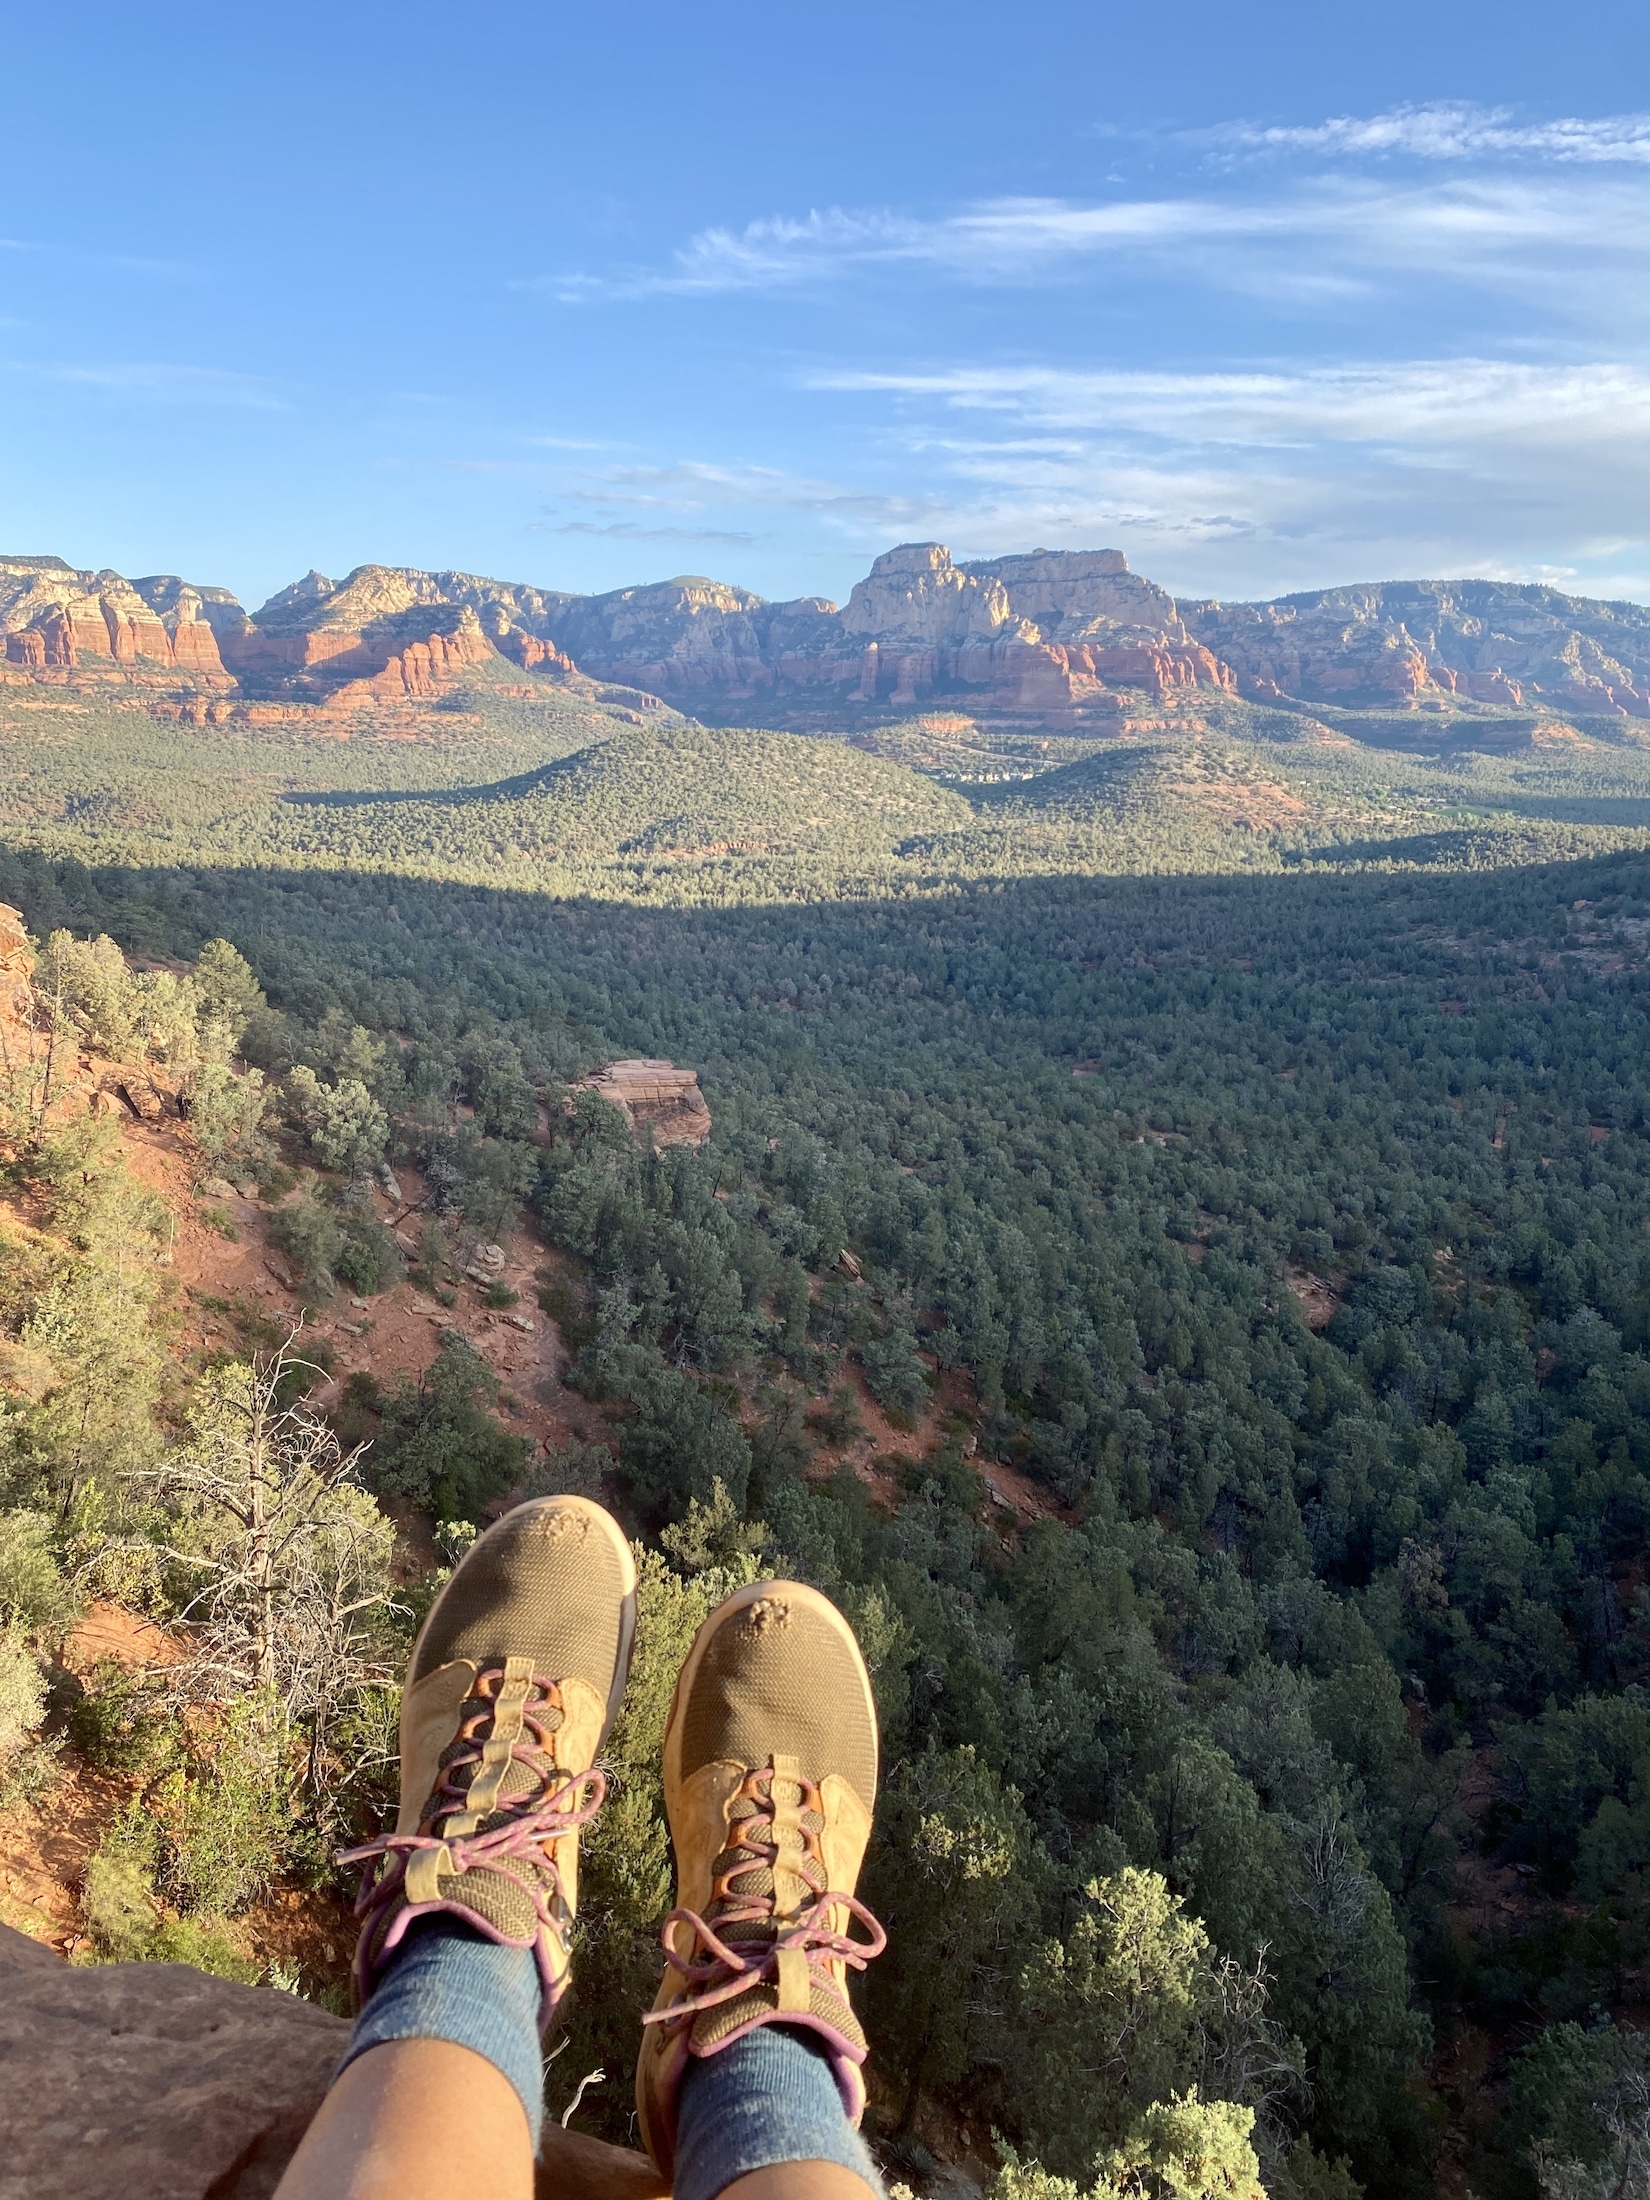 Hiking boots dangling in front of a view of mountains and valley in Sedona, Arizona